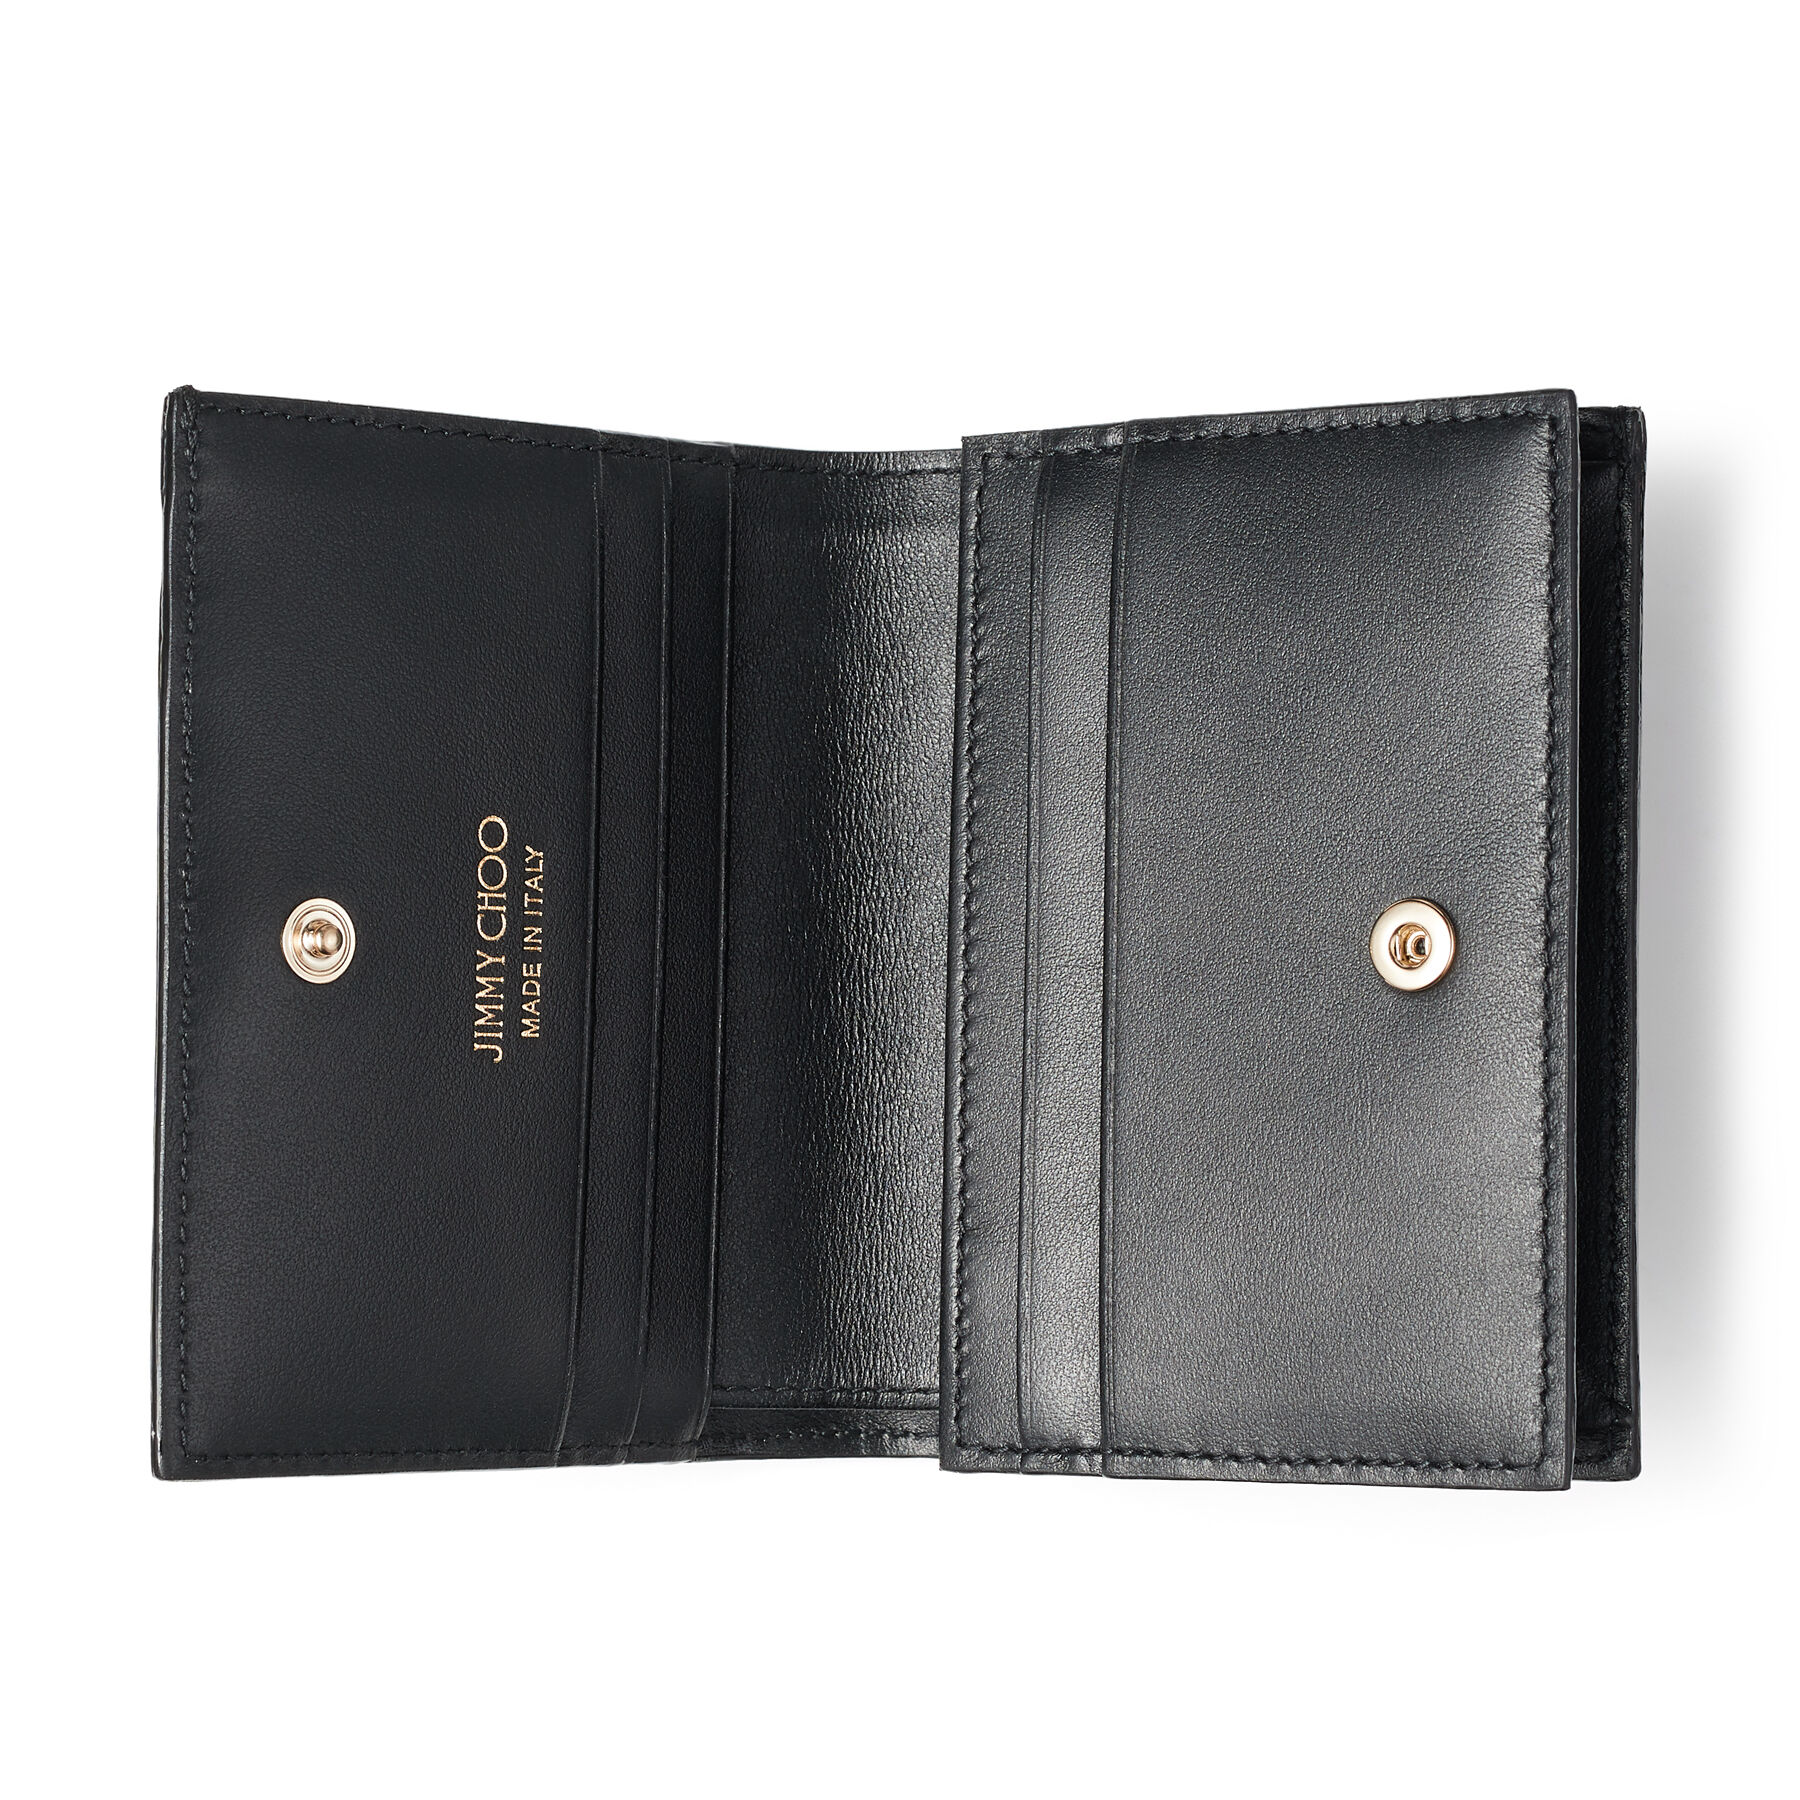 Black Smooth Calf Leather Wallet with JC Emblem |HANNE |Cruise '20 